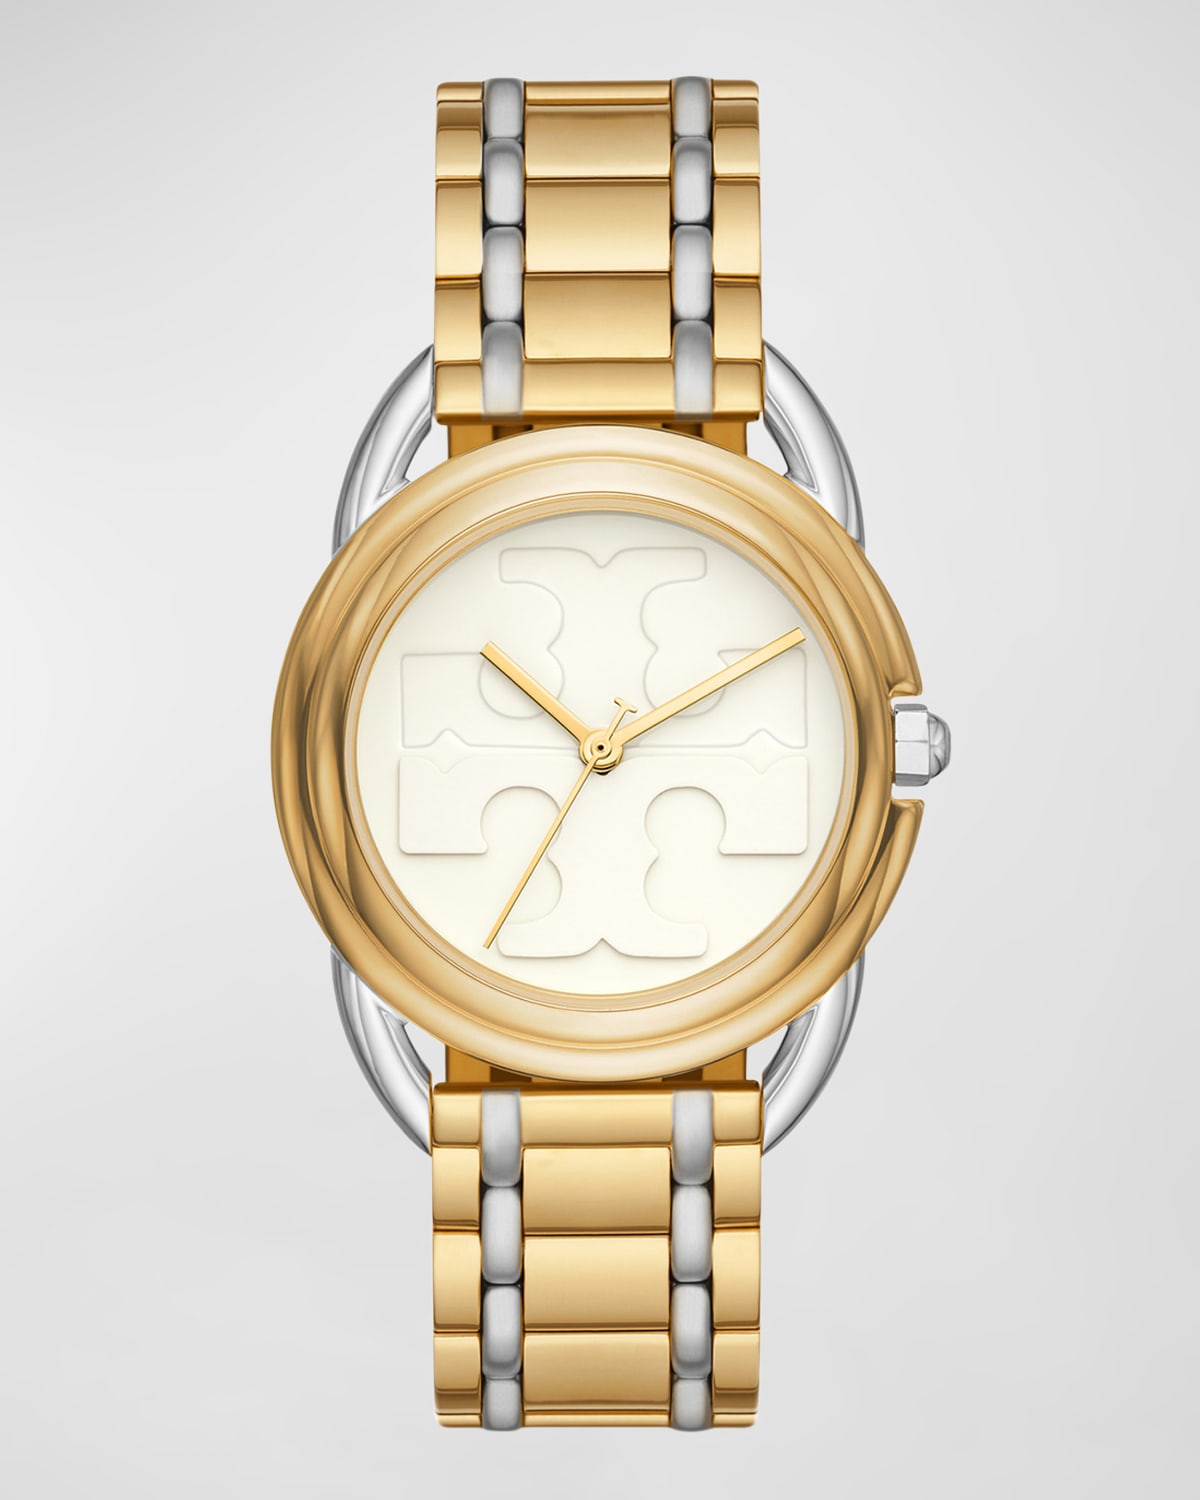 The Miller Two-Tone Stainless Steel Bracelet Watch